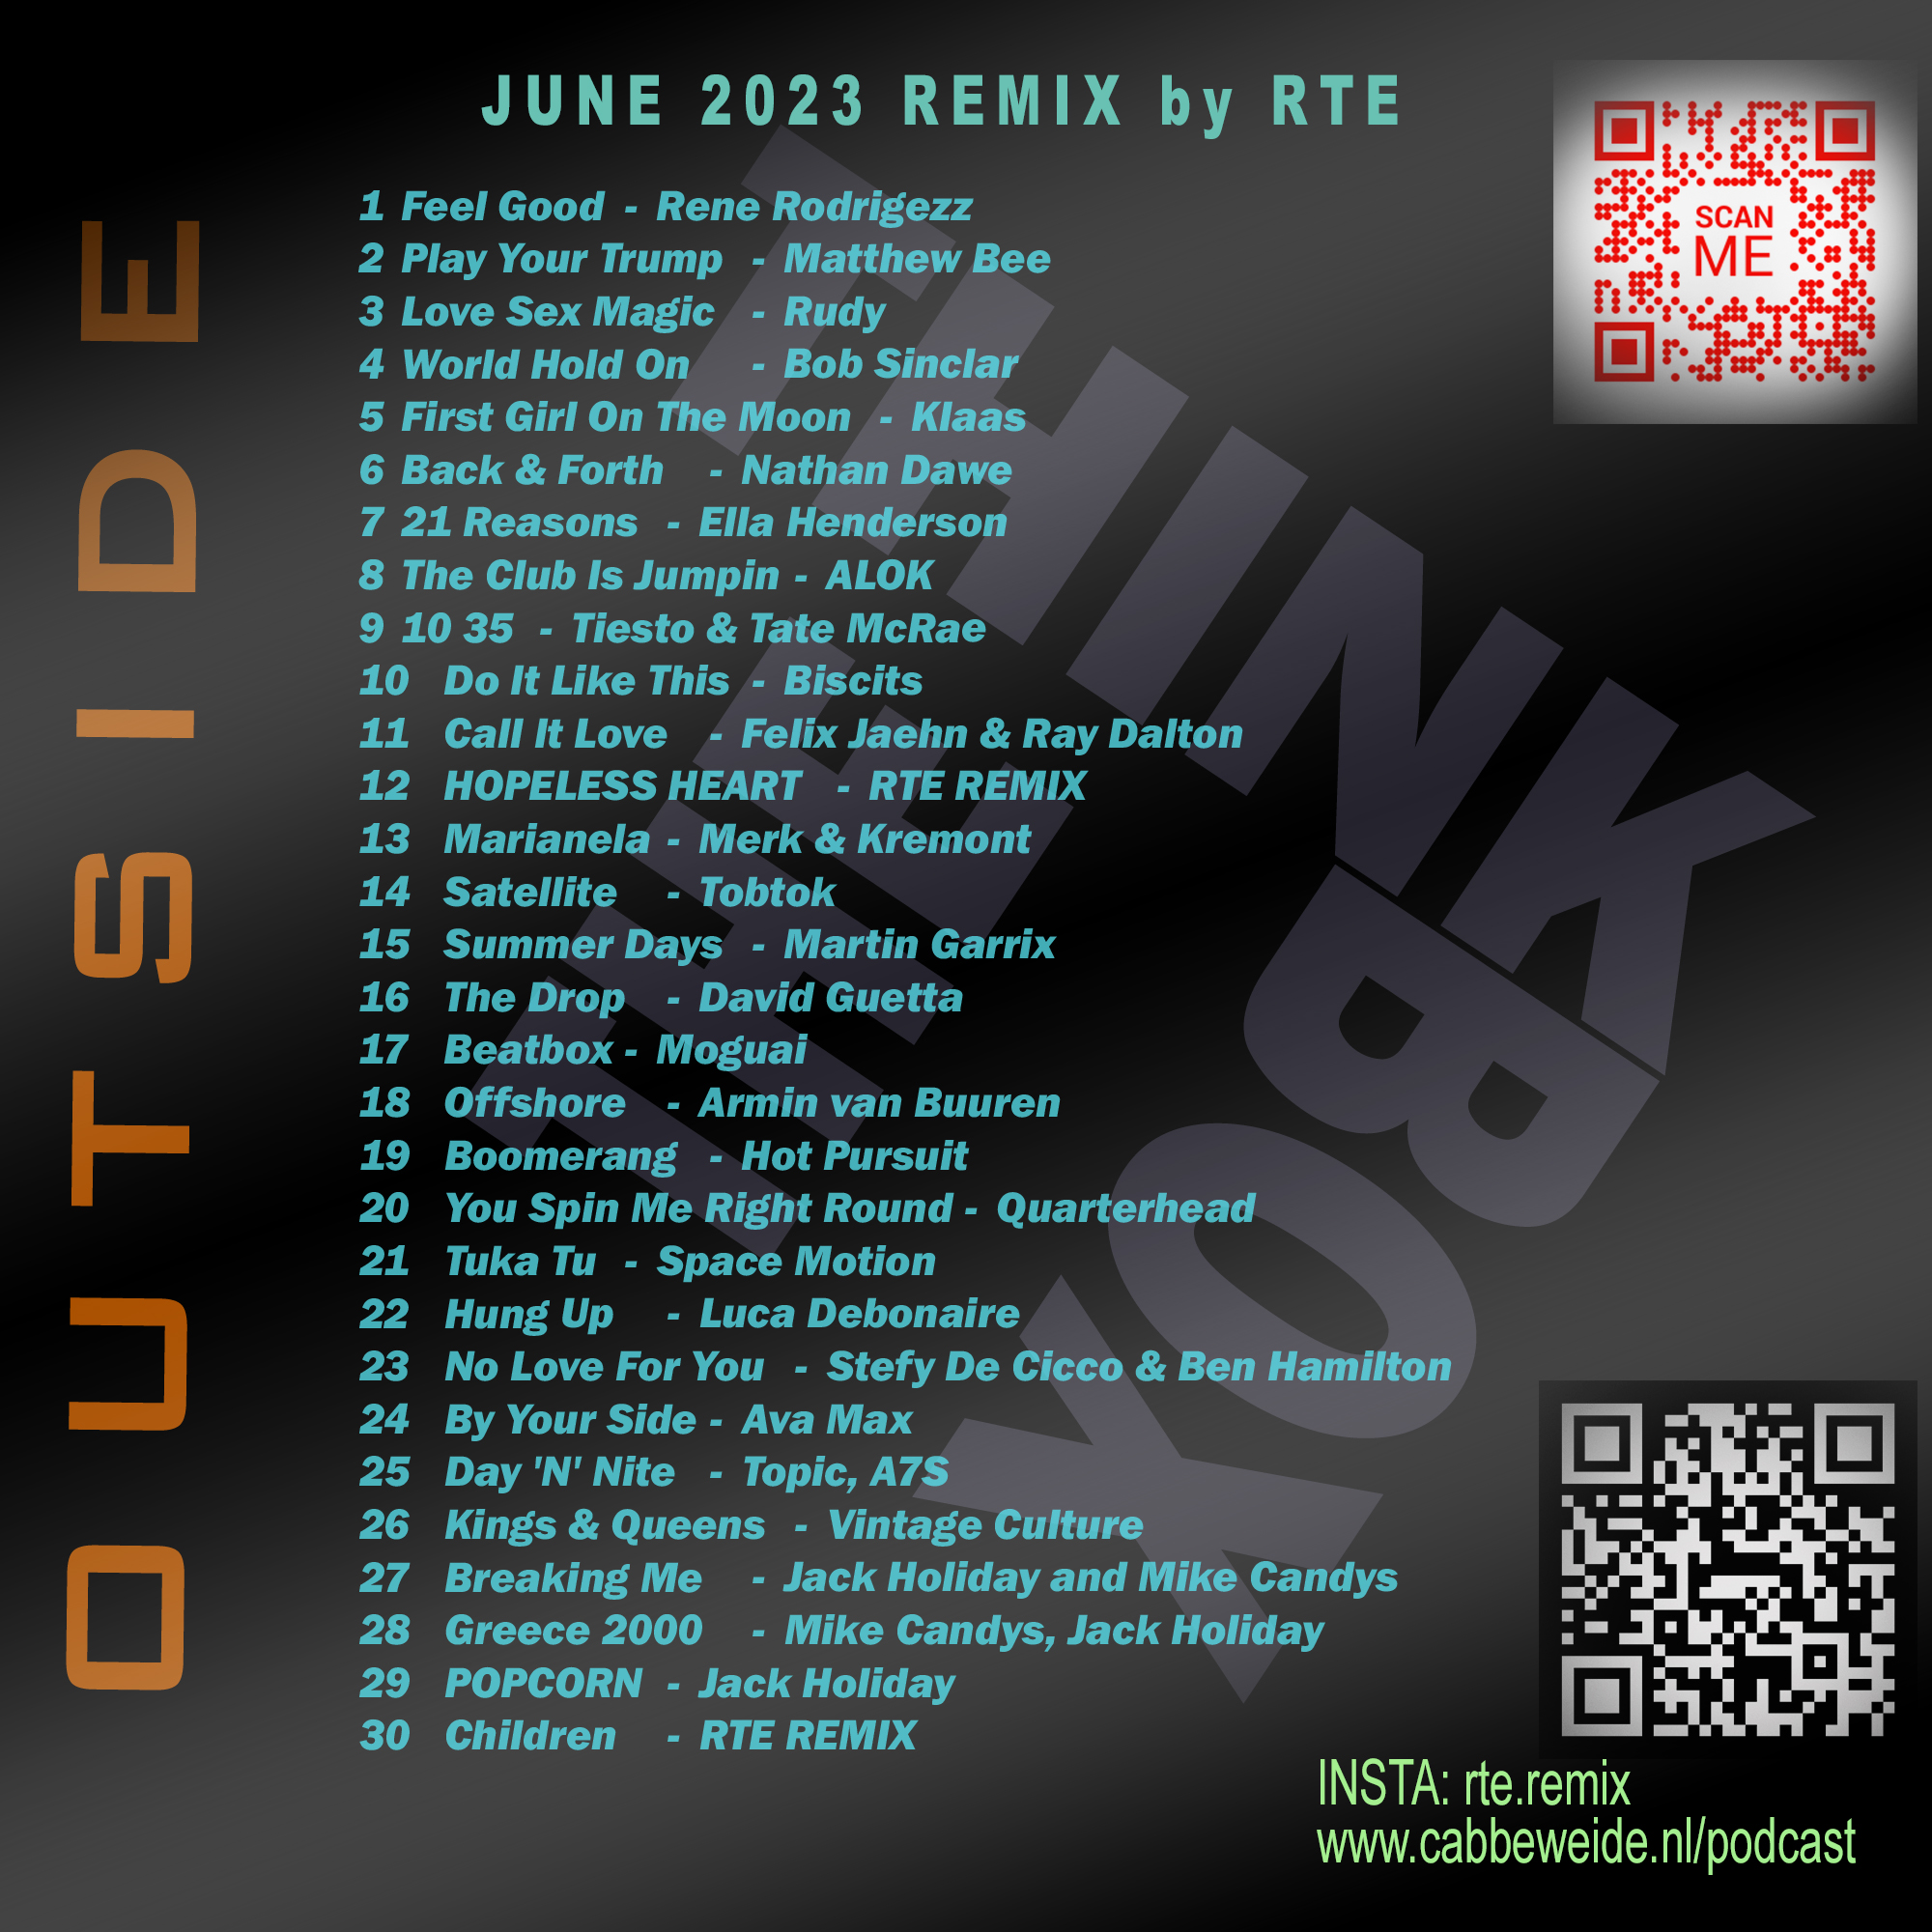 JUNE 2023 REMIX by RTE